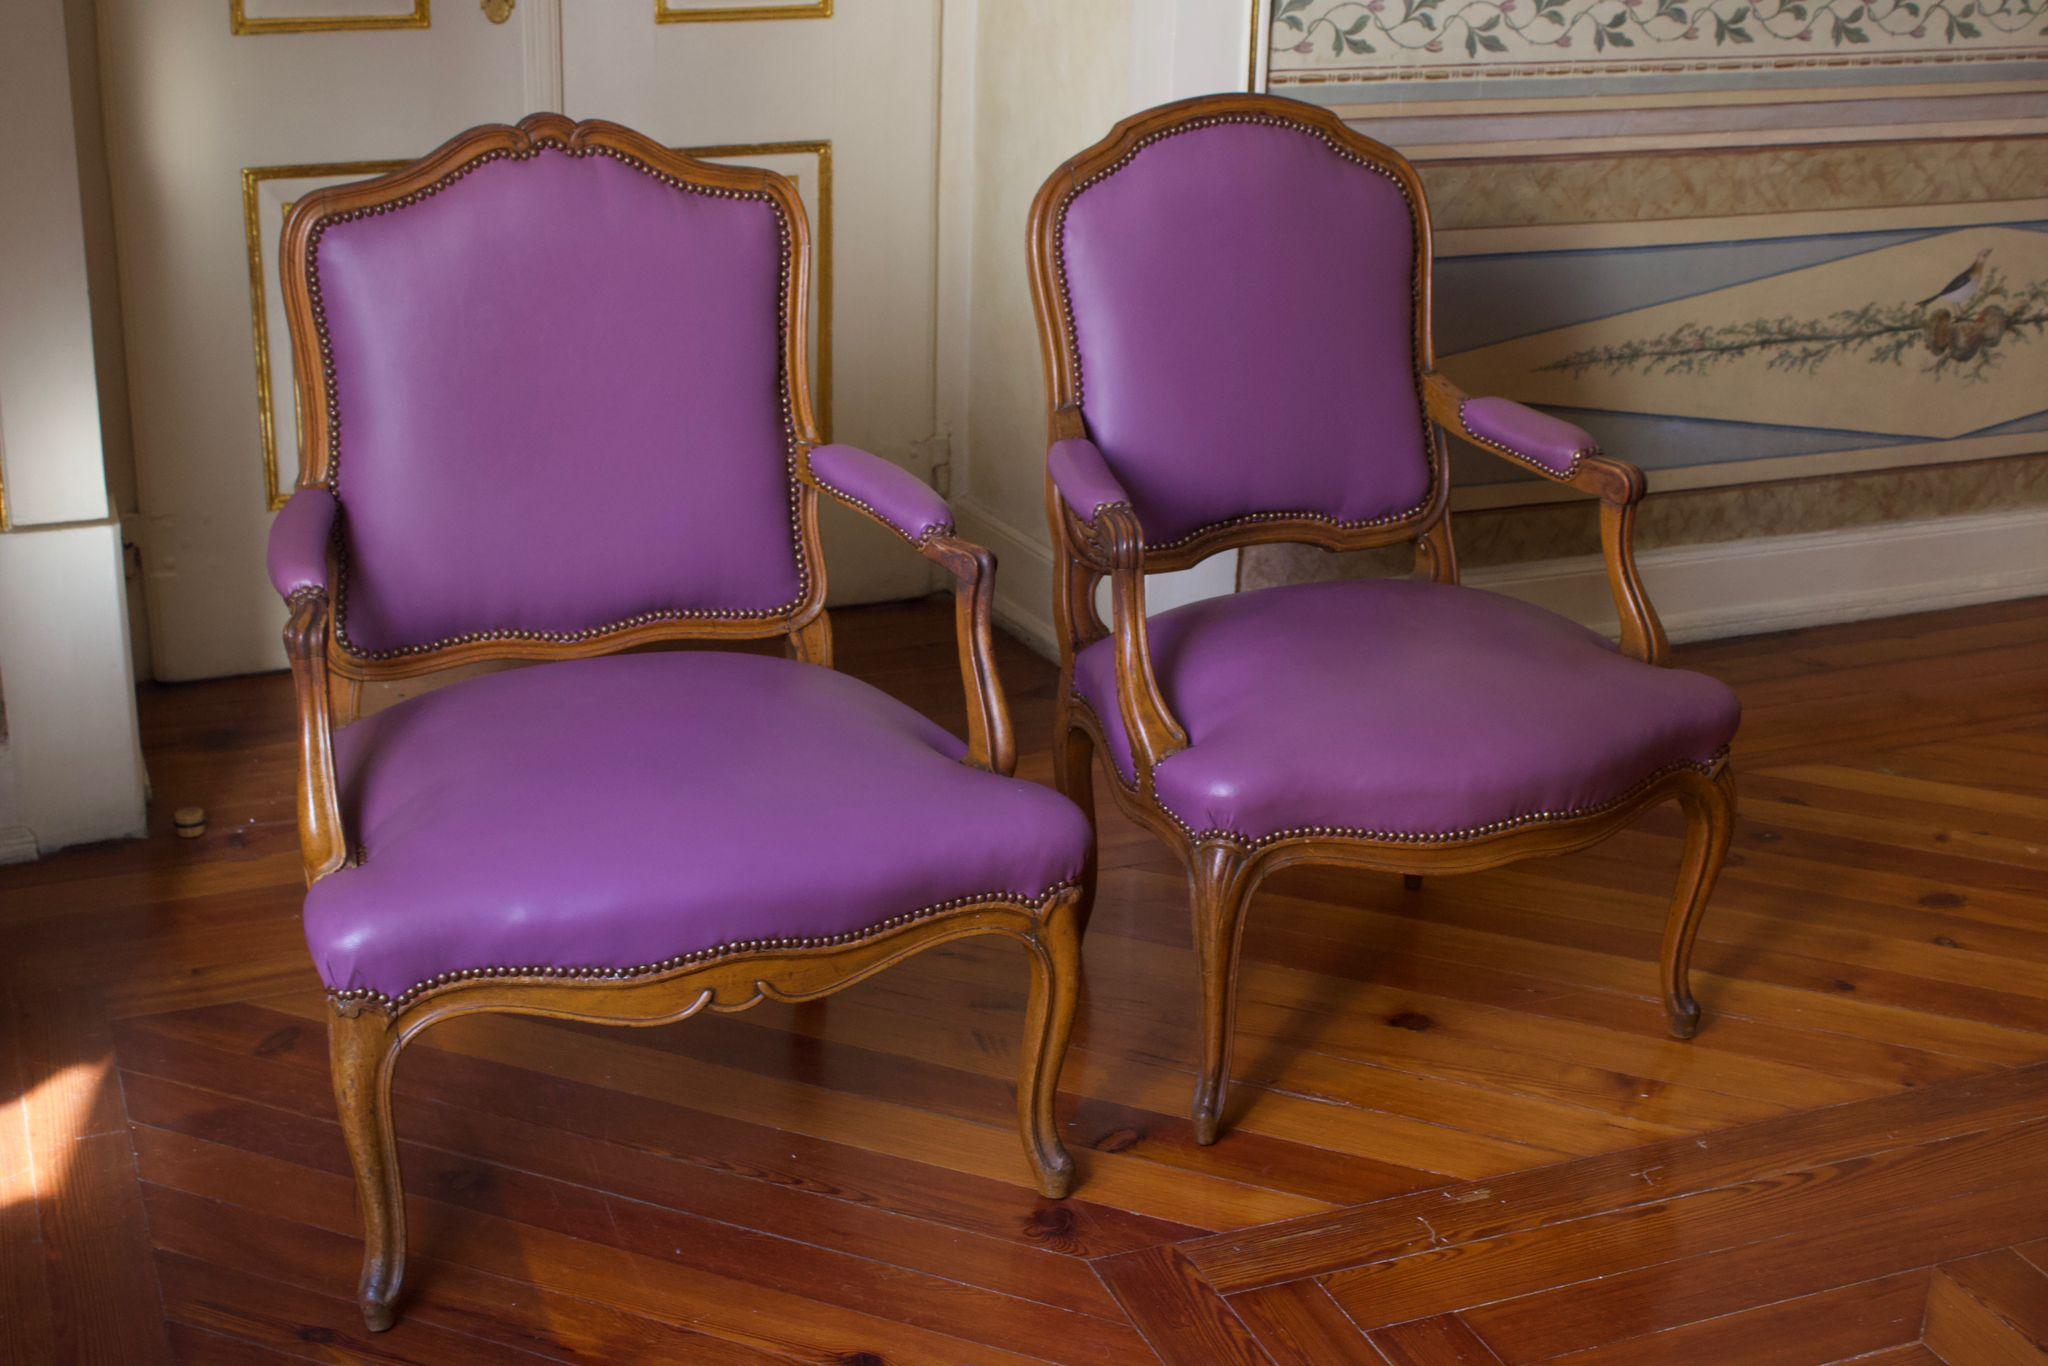 French Set of Two Louis XVI Chairs, in Carved Walnut, France, 18th Century '1774-1791' For Sale